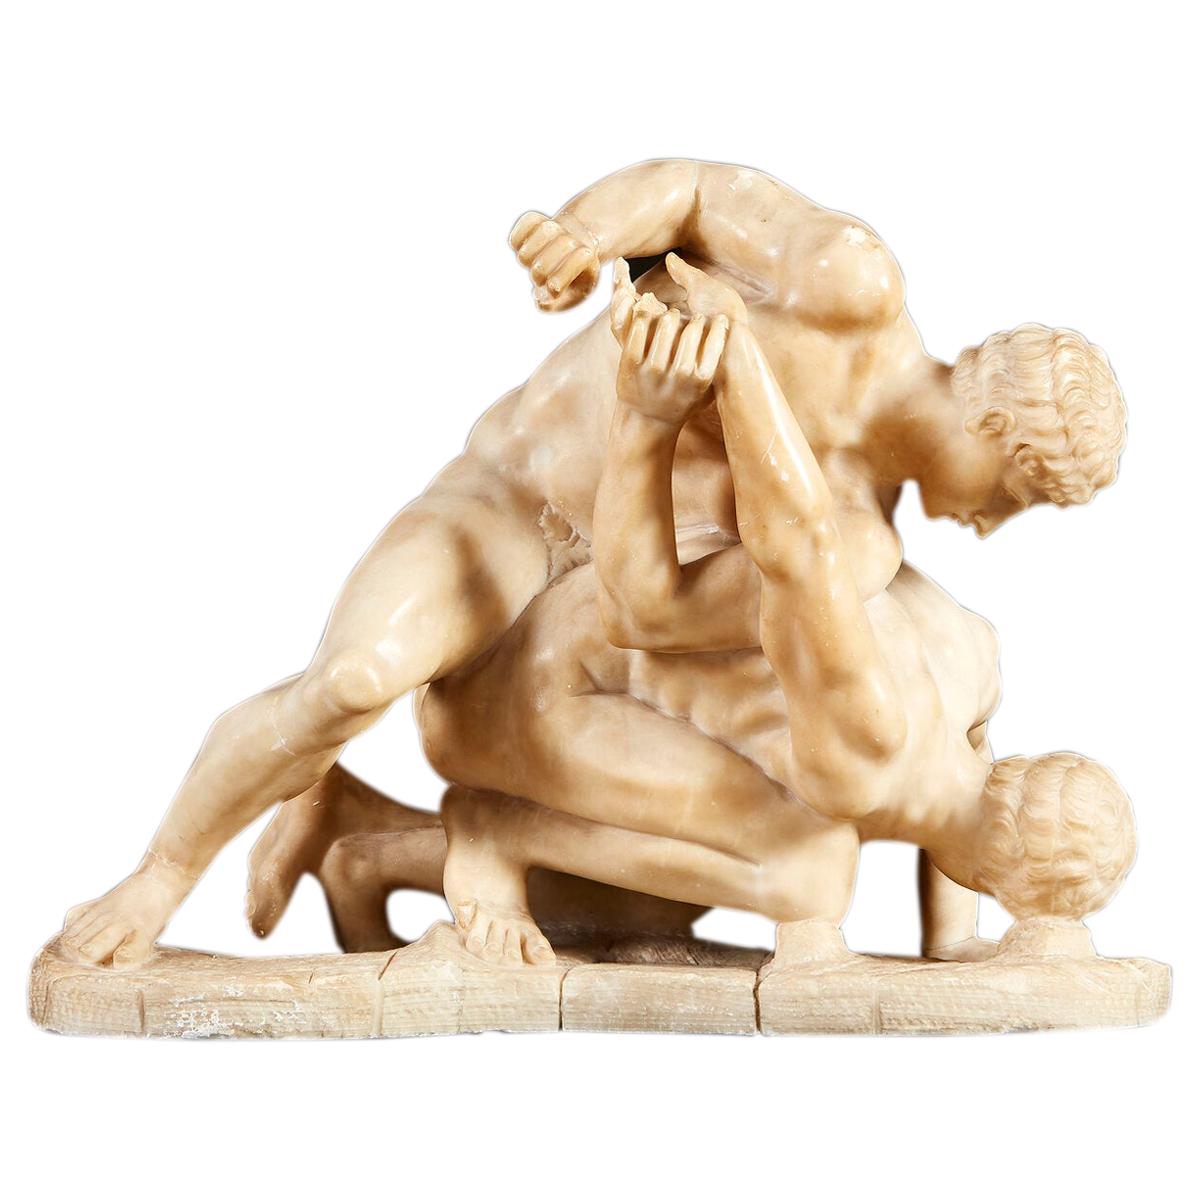 19th Century Alabaster Sculpture After 'The Wrestlers'